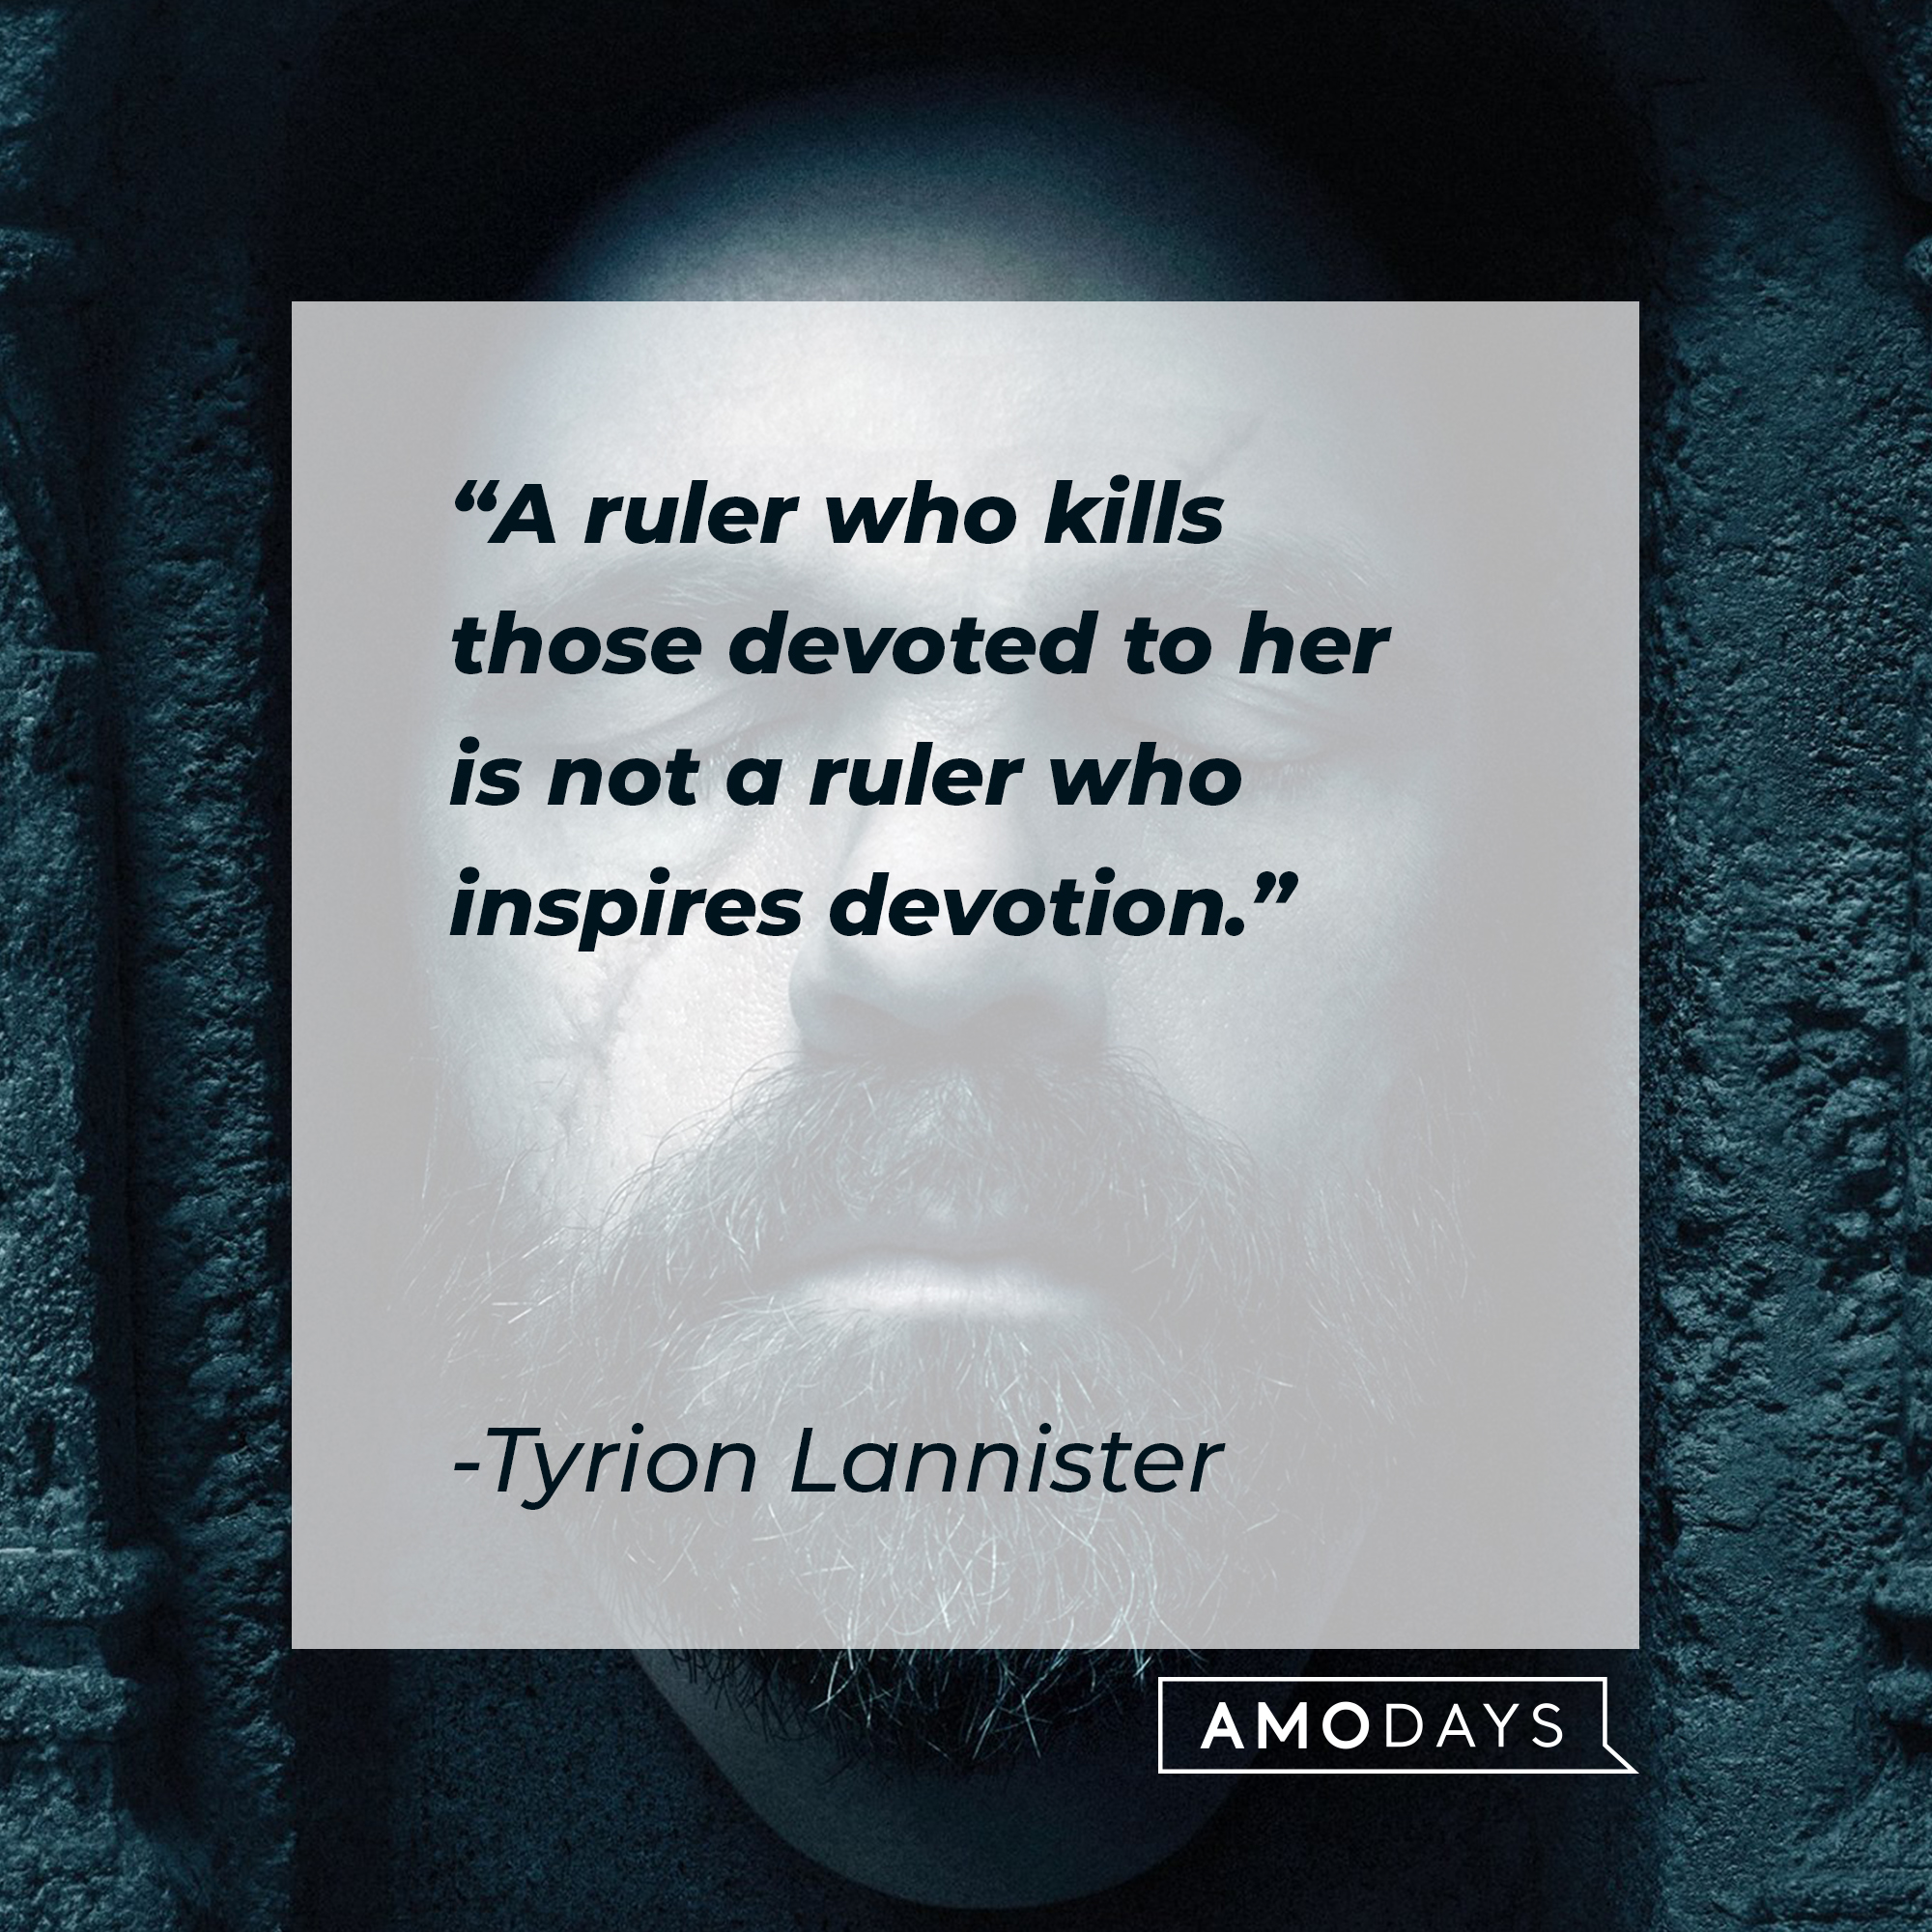 Tyrion Lannister's quote: “A ruler who kills those devoted to her is not a ruler who inspires devotion.” | Source: facebook.com/GameOfThrones